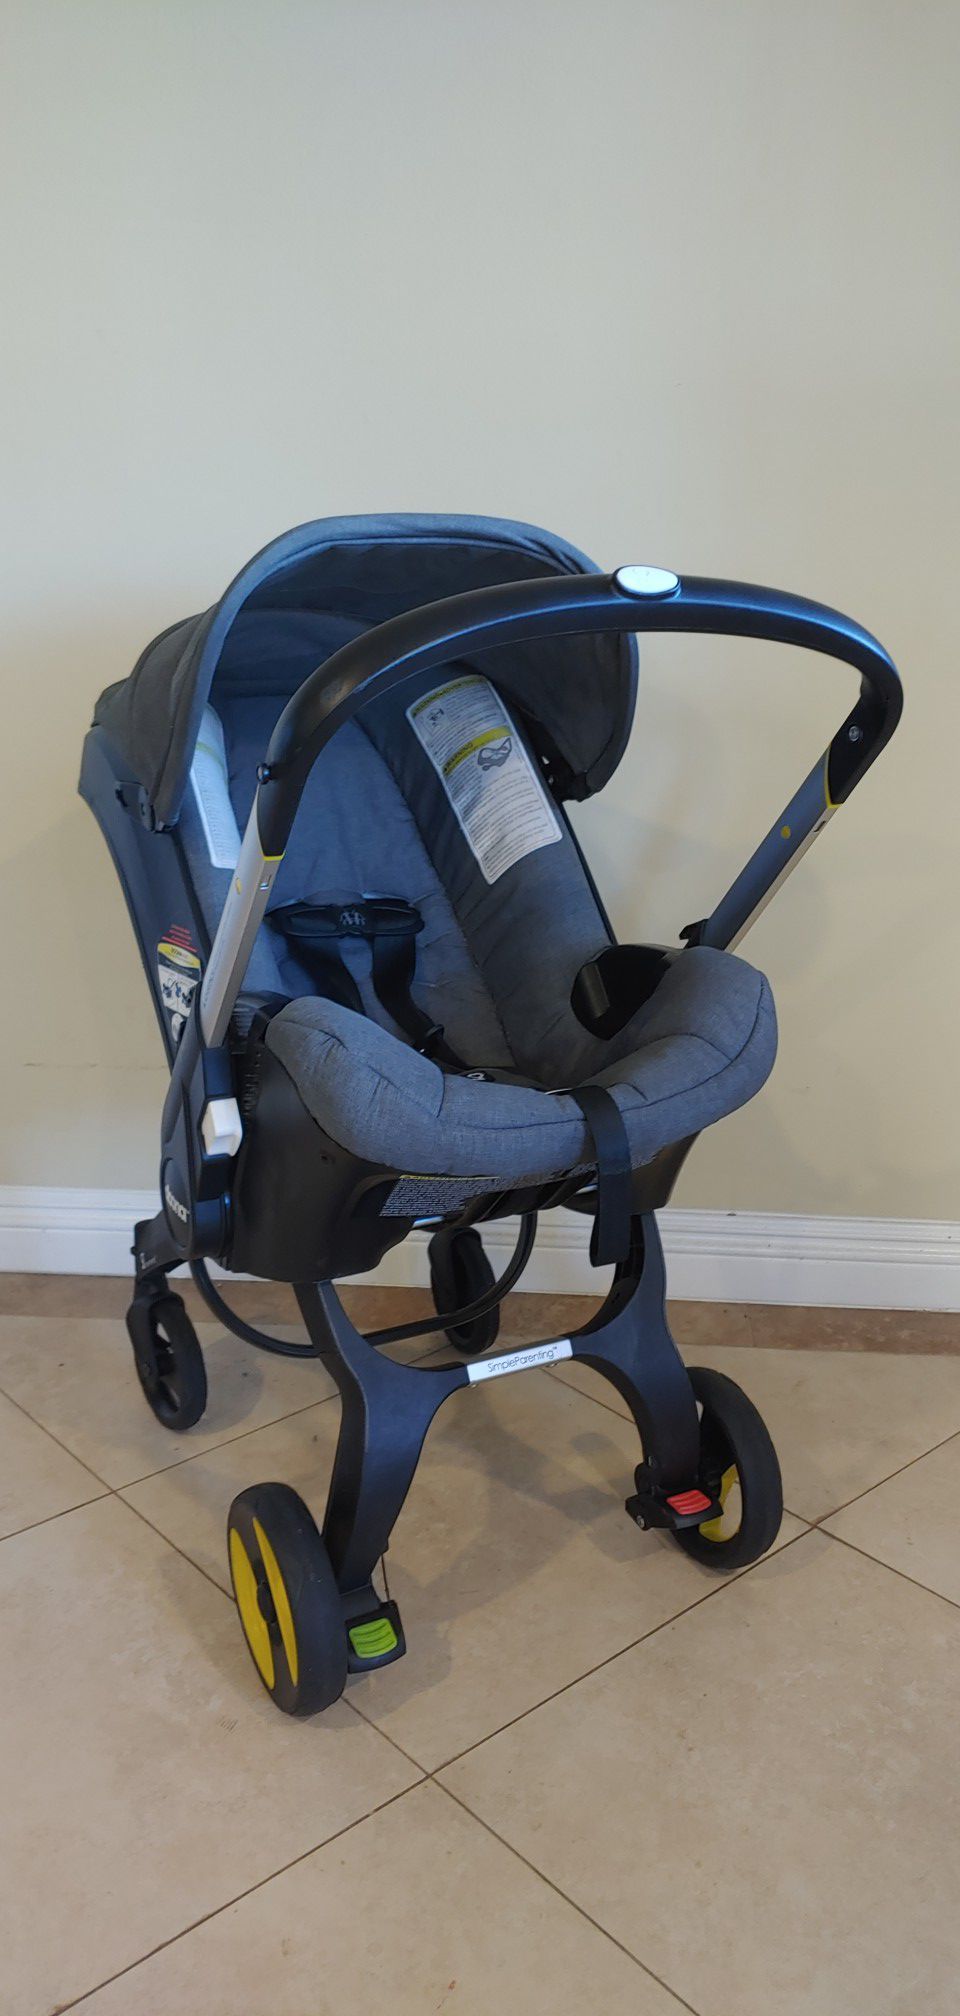 Doona car seat stroller retail $650. Best baby product I owned